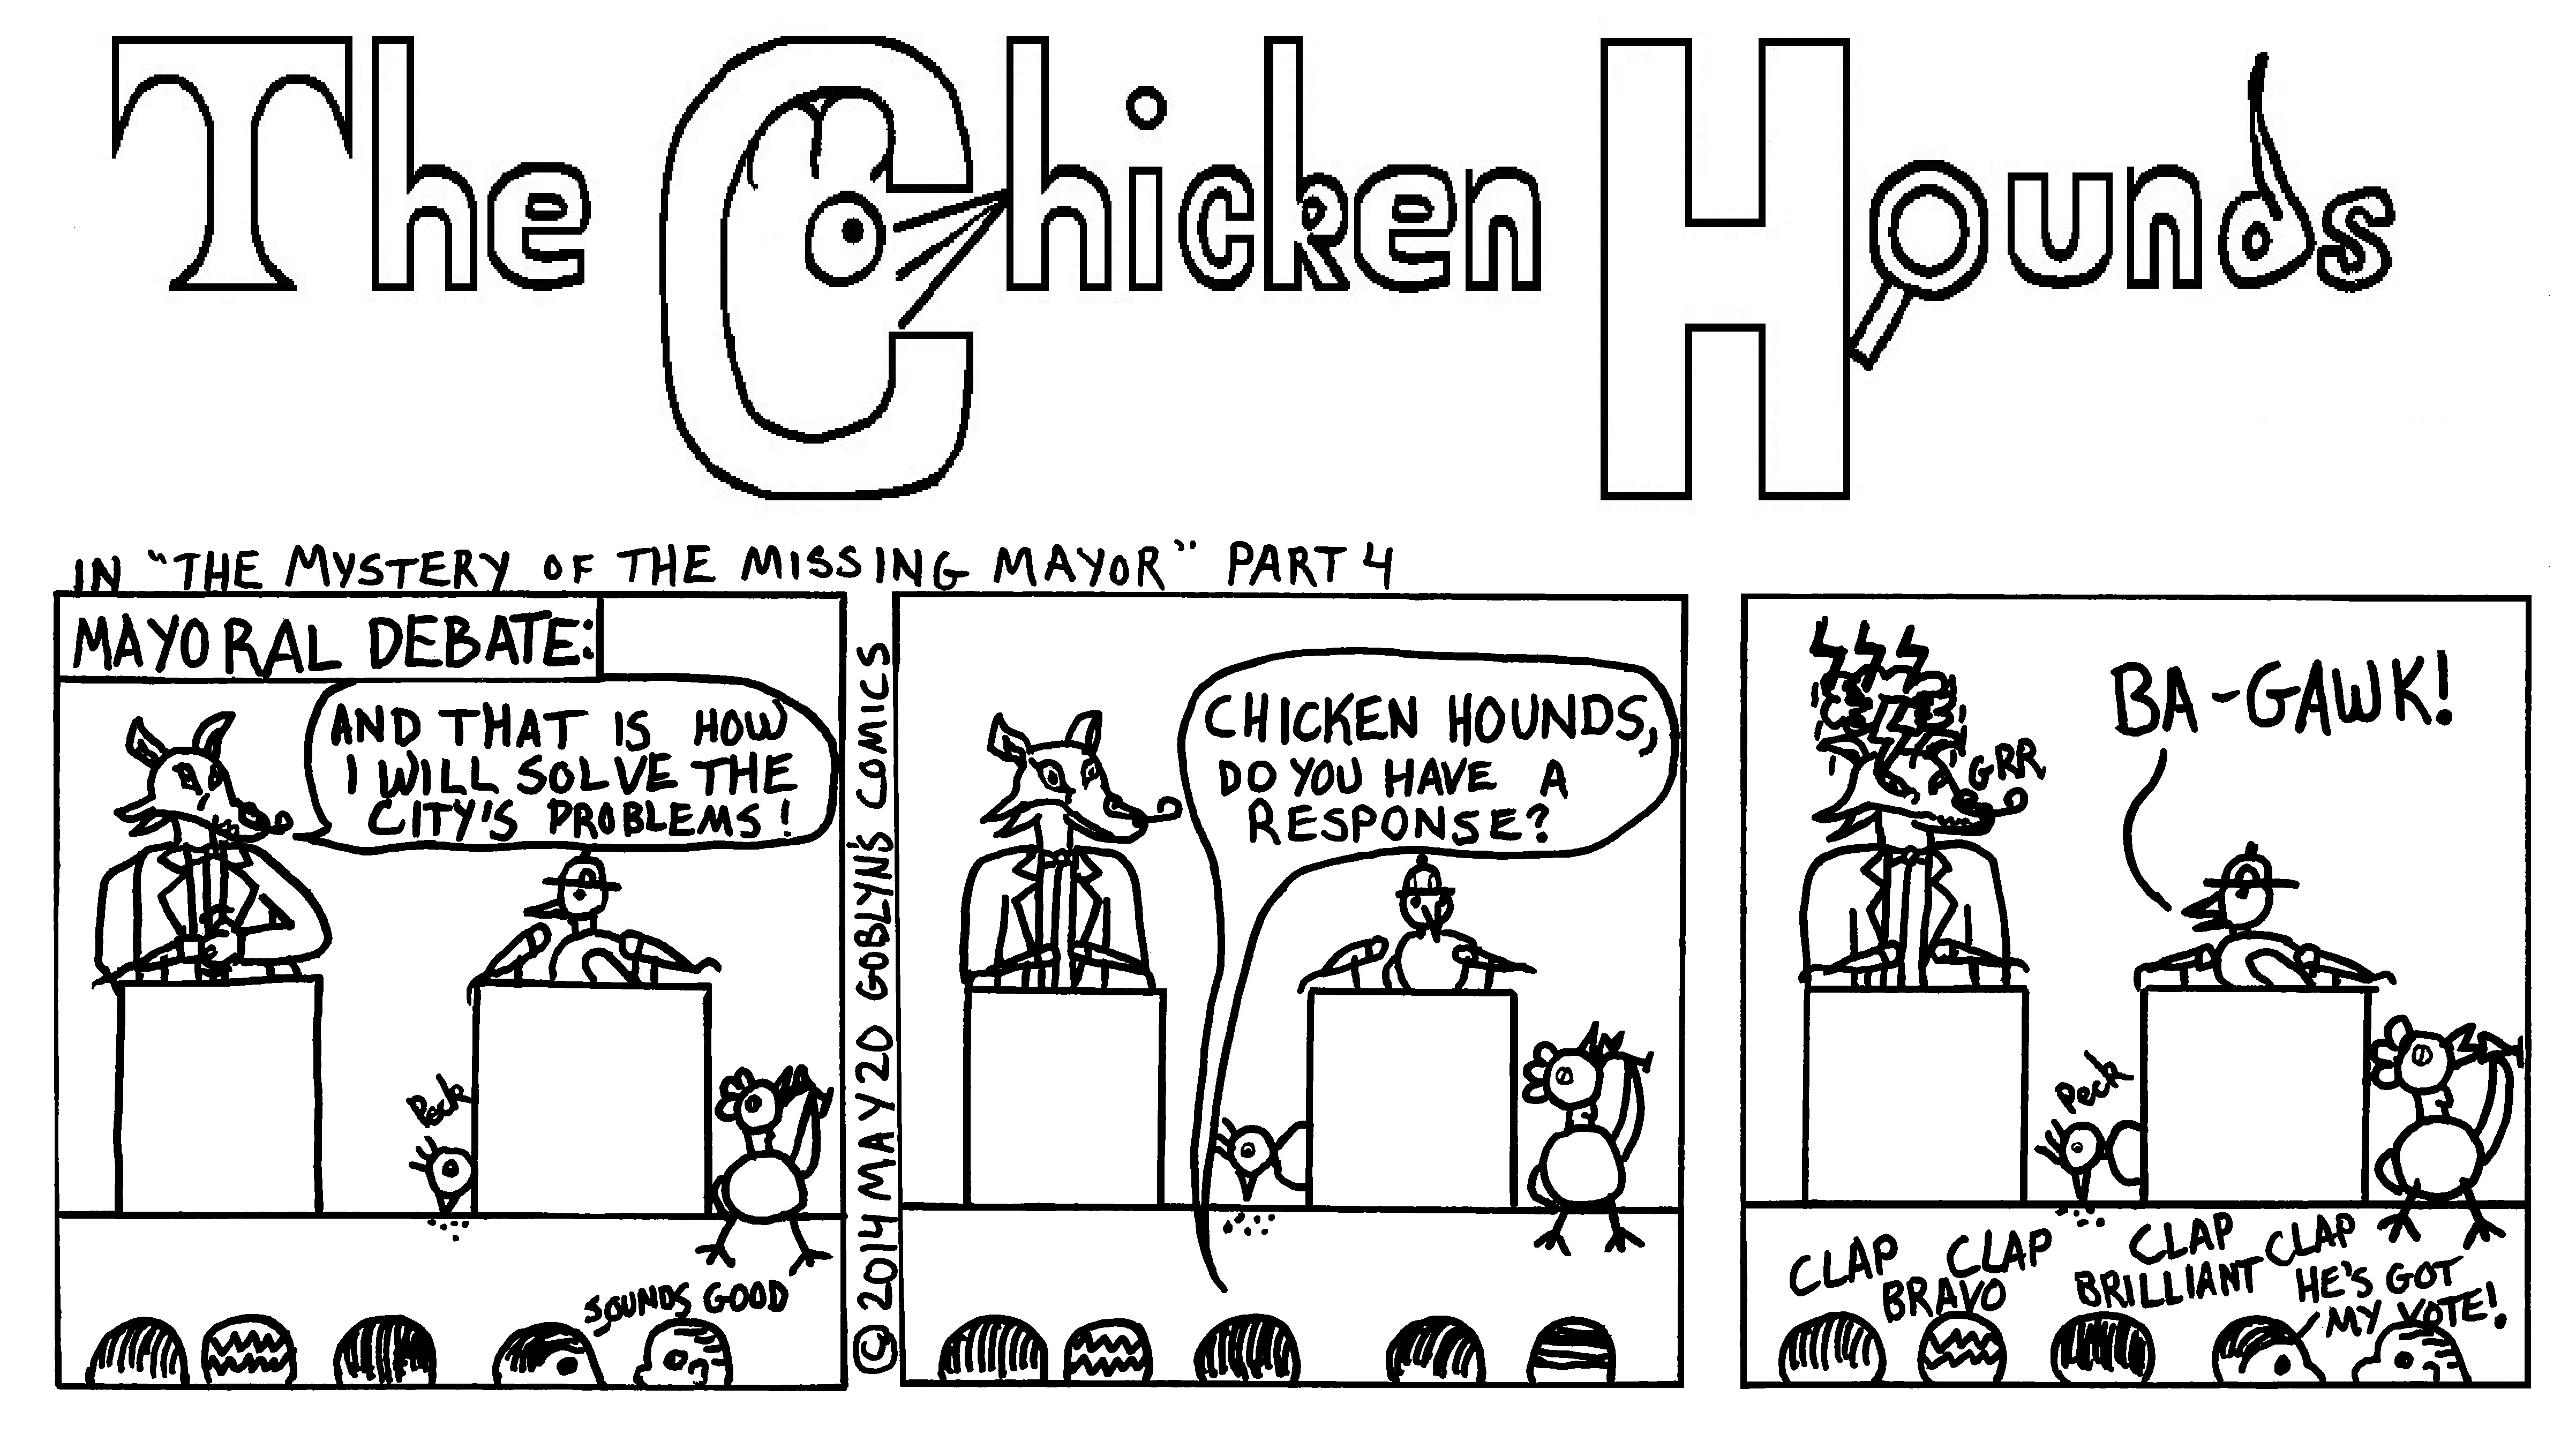 The Chicken Hounds, San Francisco's Greatest Detectives, in "The Mystery of the Missing Mayor" Part 4. The Chicken Hounds plan for San Francisco: Ba-Gawk!